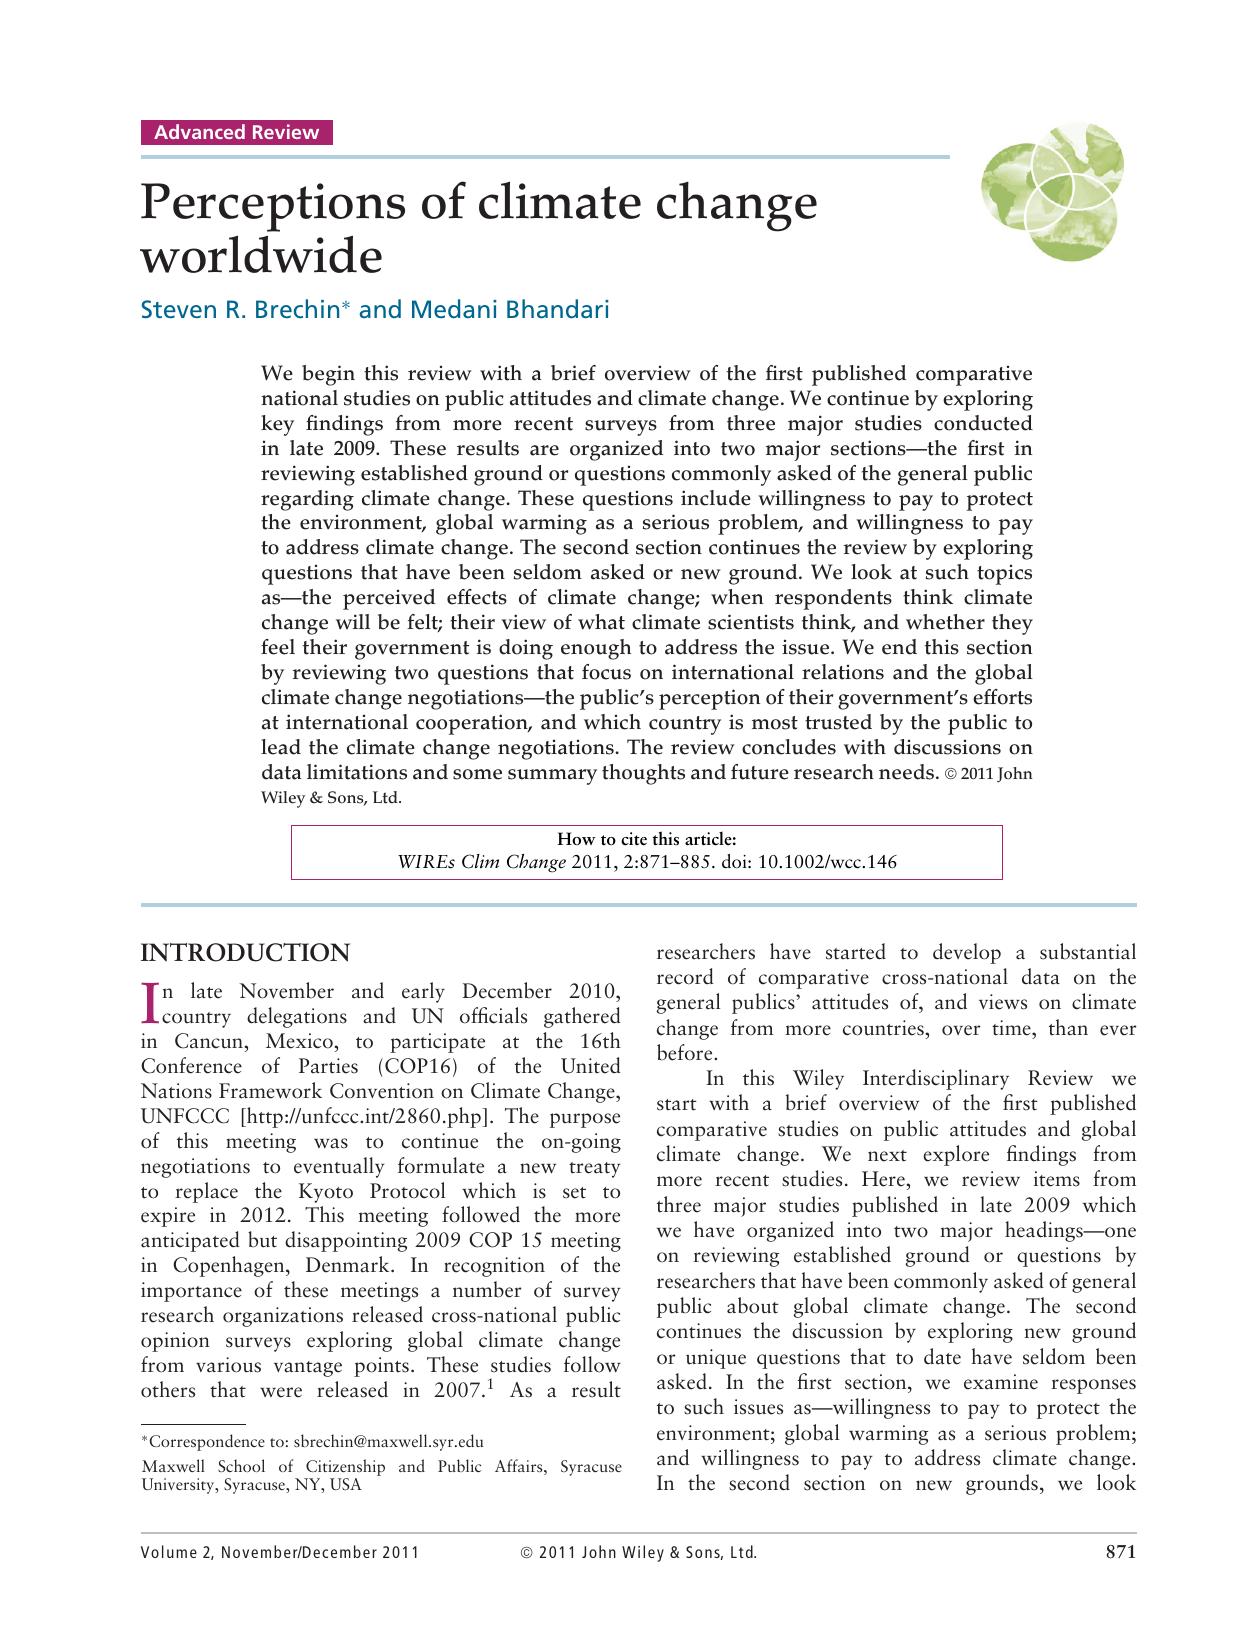 Perceptions of climate change worldwide